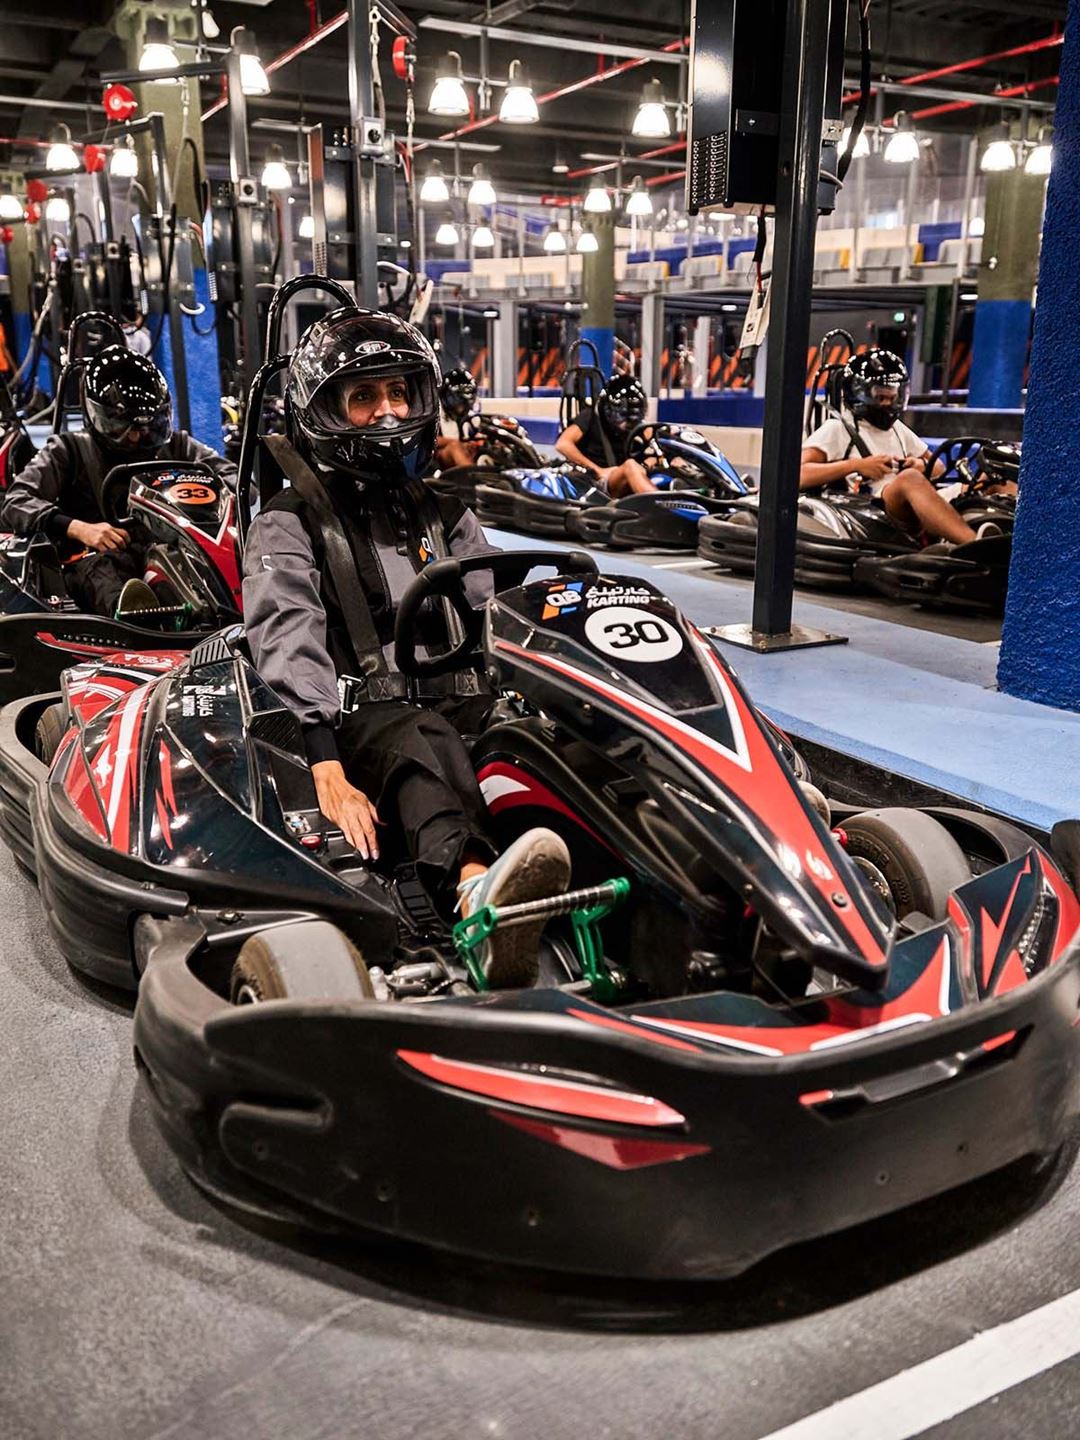 Al Kout Mall Opens the Largest Indoor Multi-Storey Go-Kart Track in the Middle East